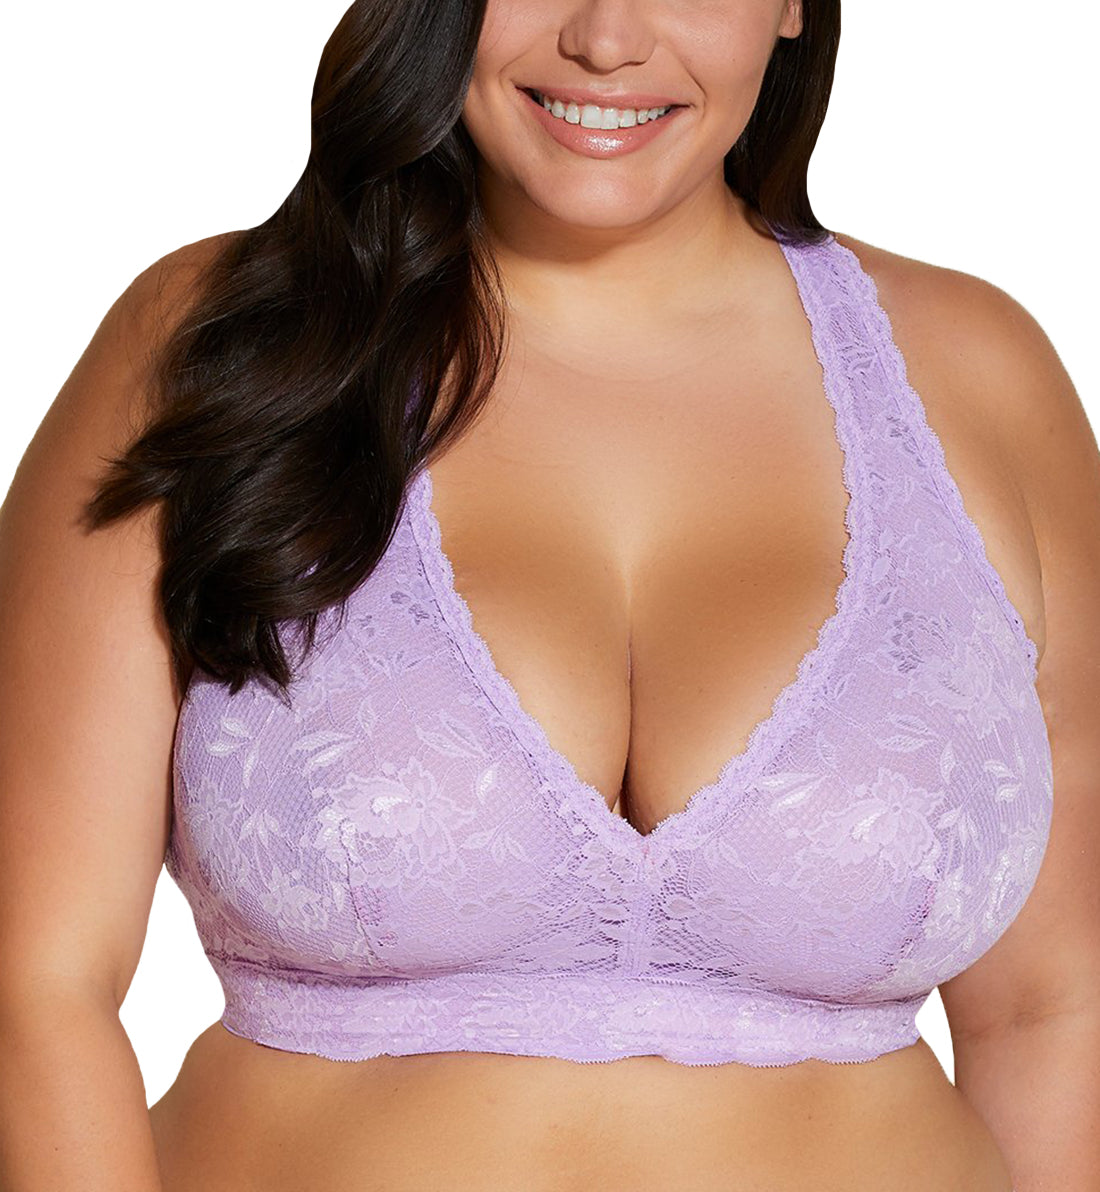 Cosabella NSN Ultra CURVY Plungie Longline Bralette (NEVER1388),XS,Icy Violet - Icy Violet,XS